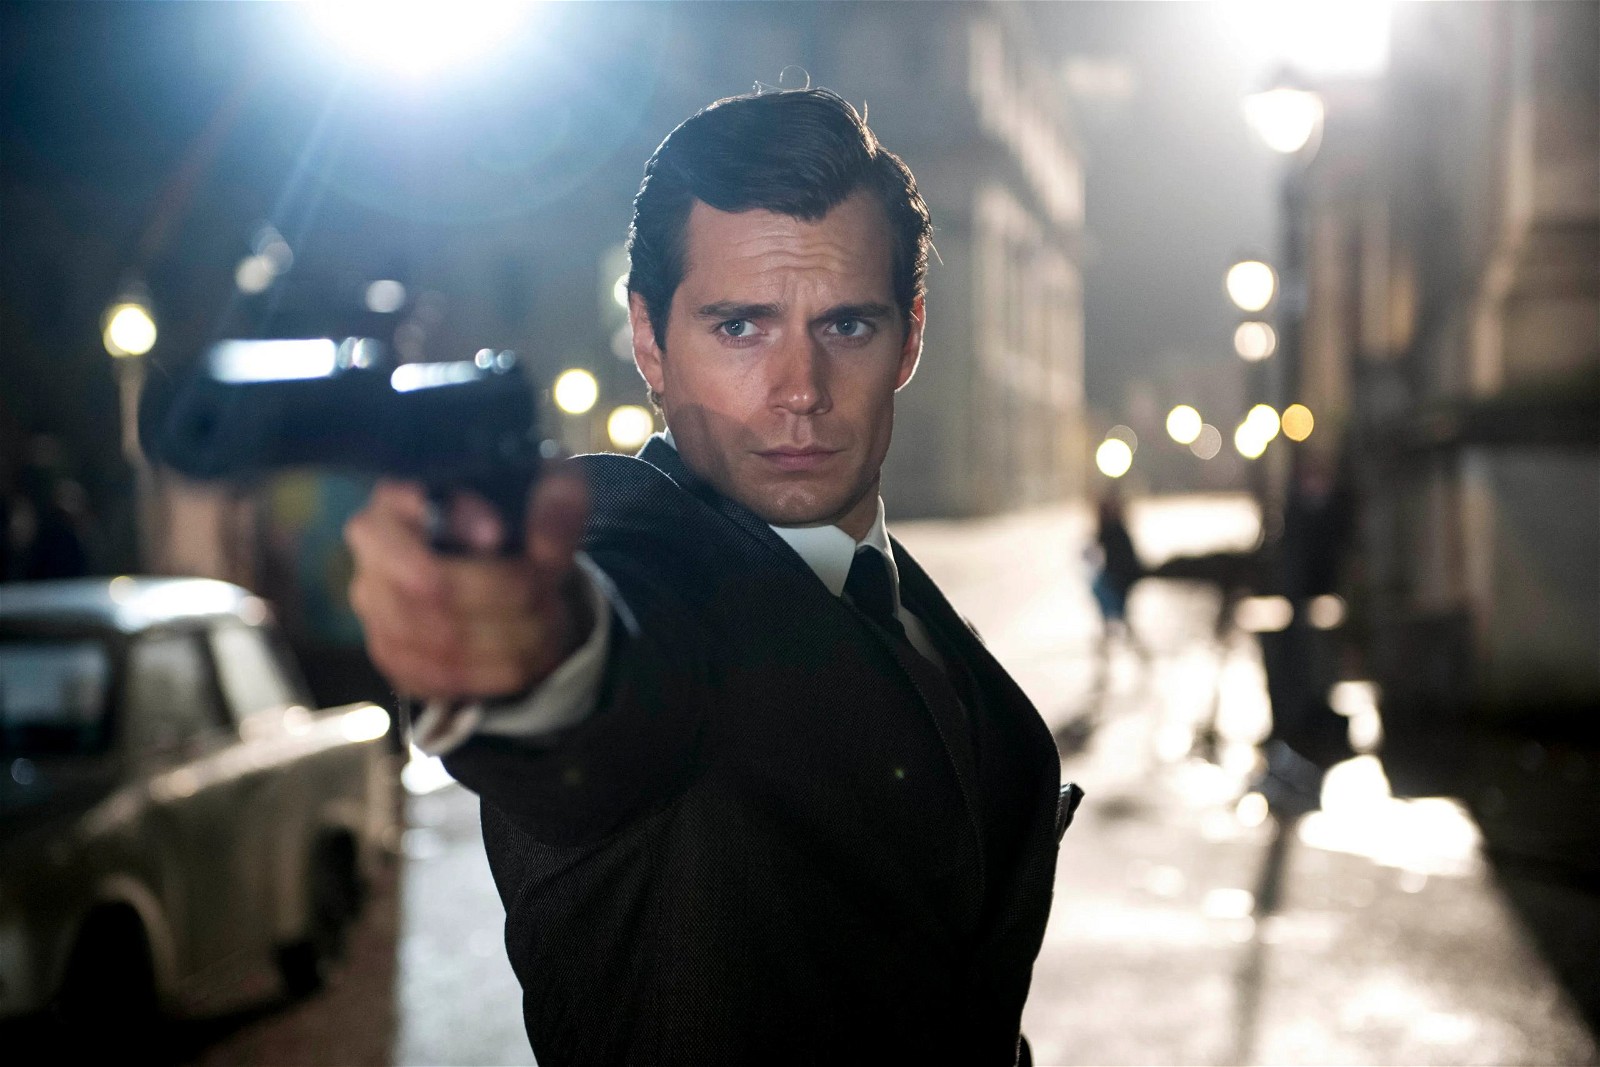 Henry Cavill dominates the screen as American spy, Napolean Solo